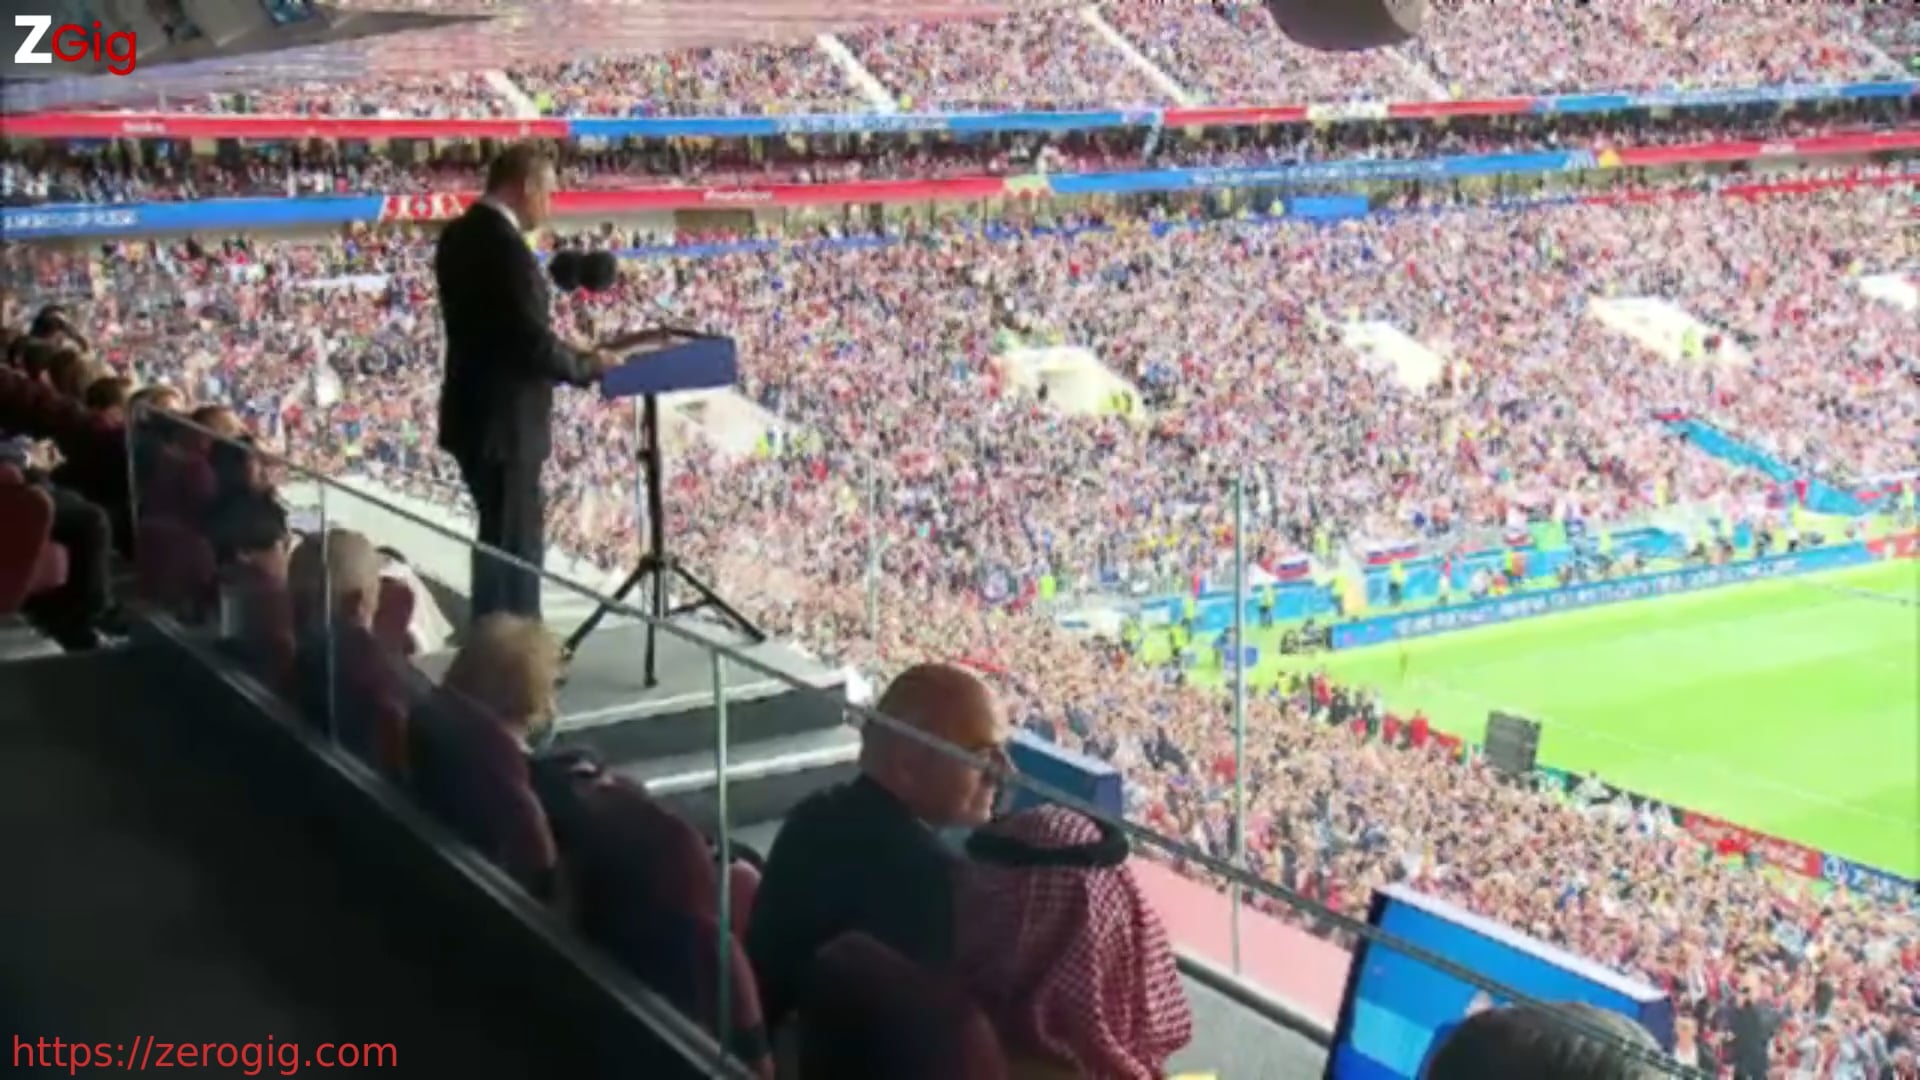 June 14, 2018 2018 FIFA World Cup opening ceremony.mp4 on Vimeo